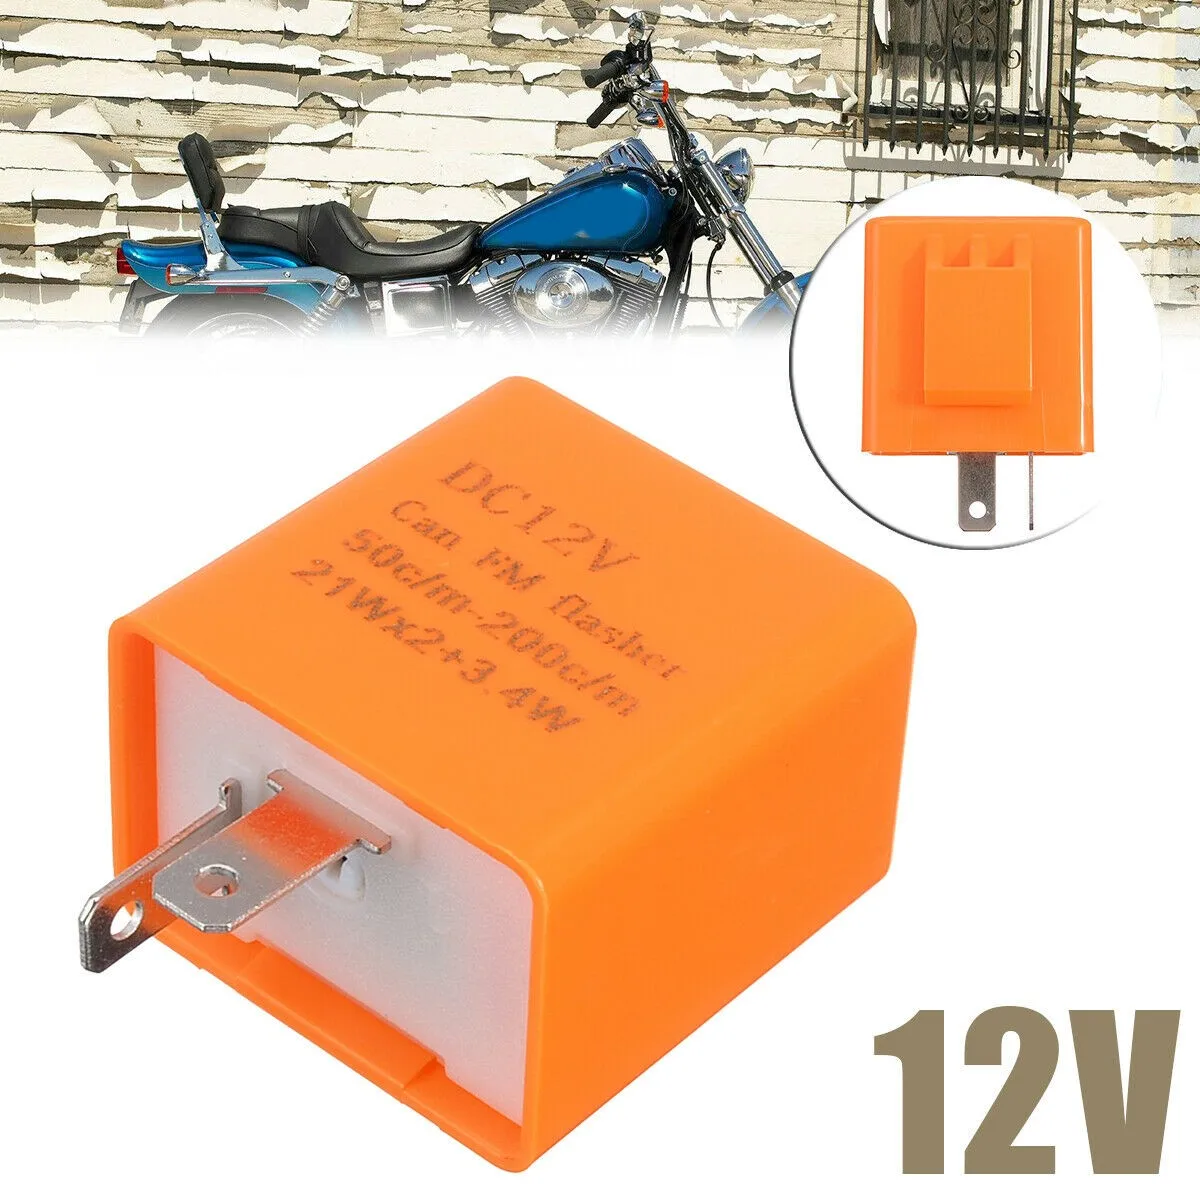 

Motorcycle Motorbike 2 Pin 42W Adjustable LED Indicator Flasher Relay A+ For Honda, For Kawasaki, For Suzuki, And Many Other Bra